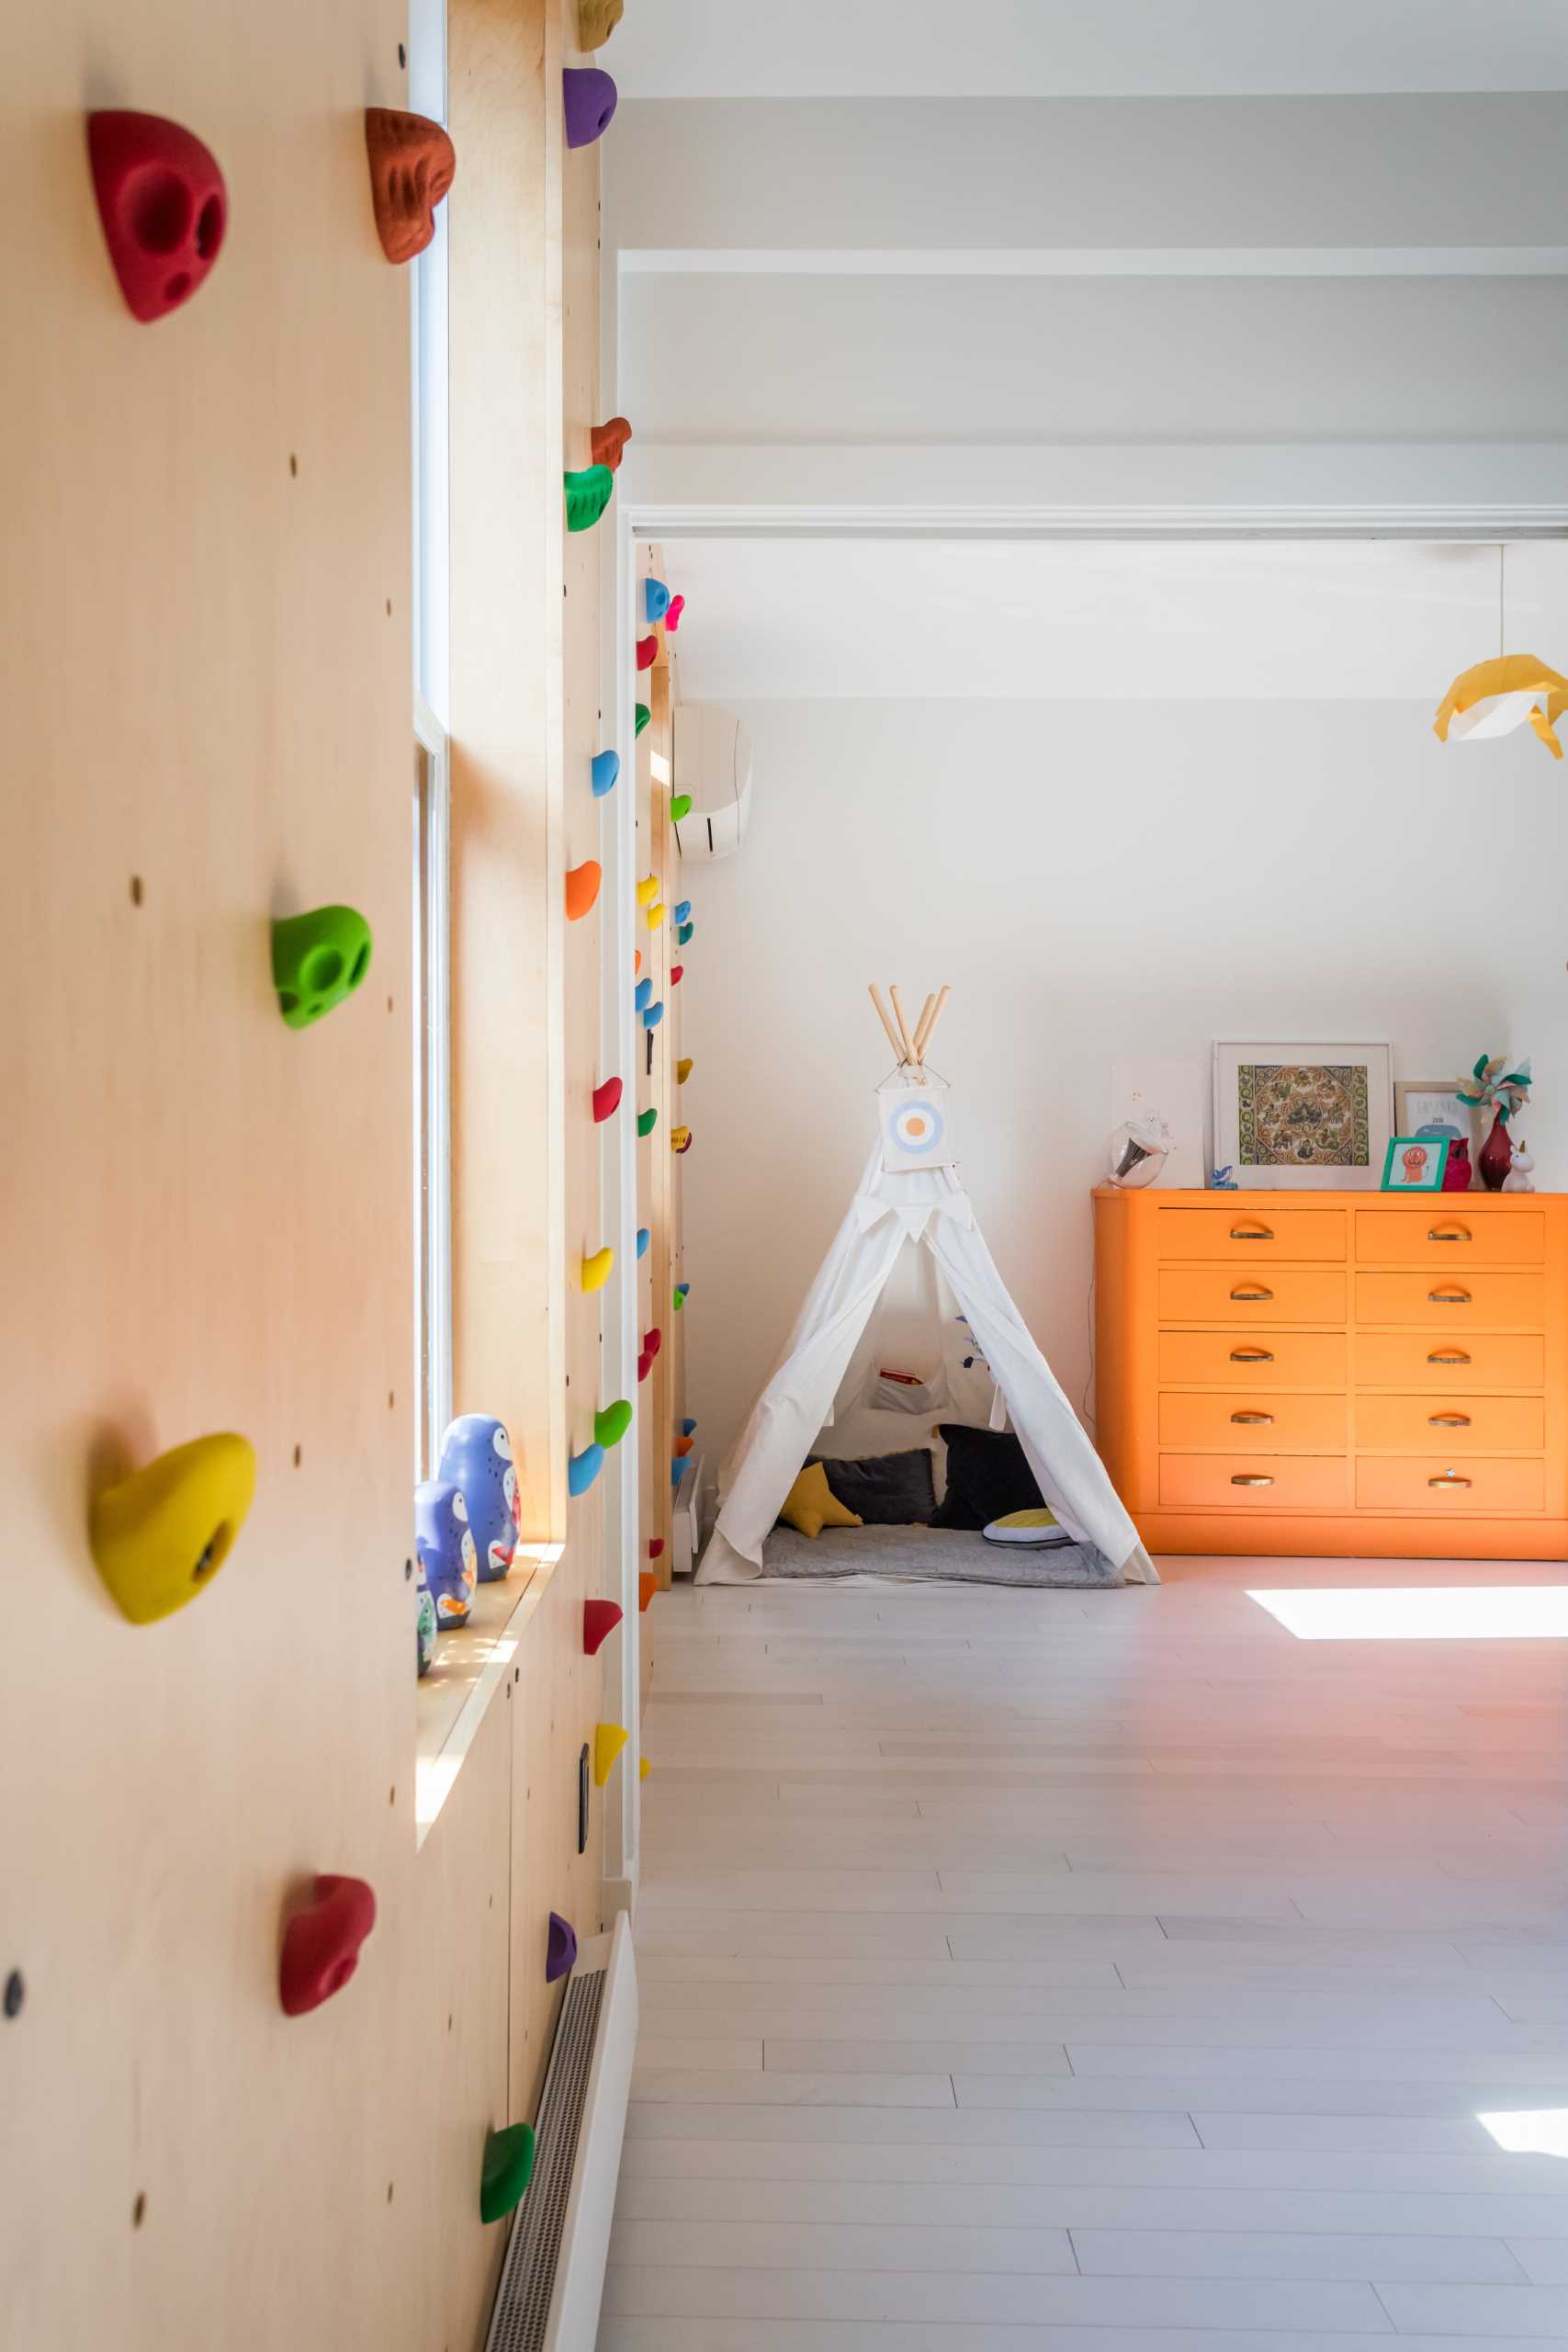 A rock-climbing wall decorates the children’s bedroom and adds a colorful accent.